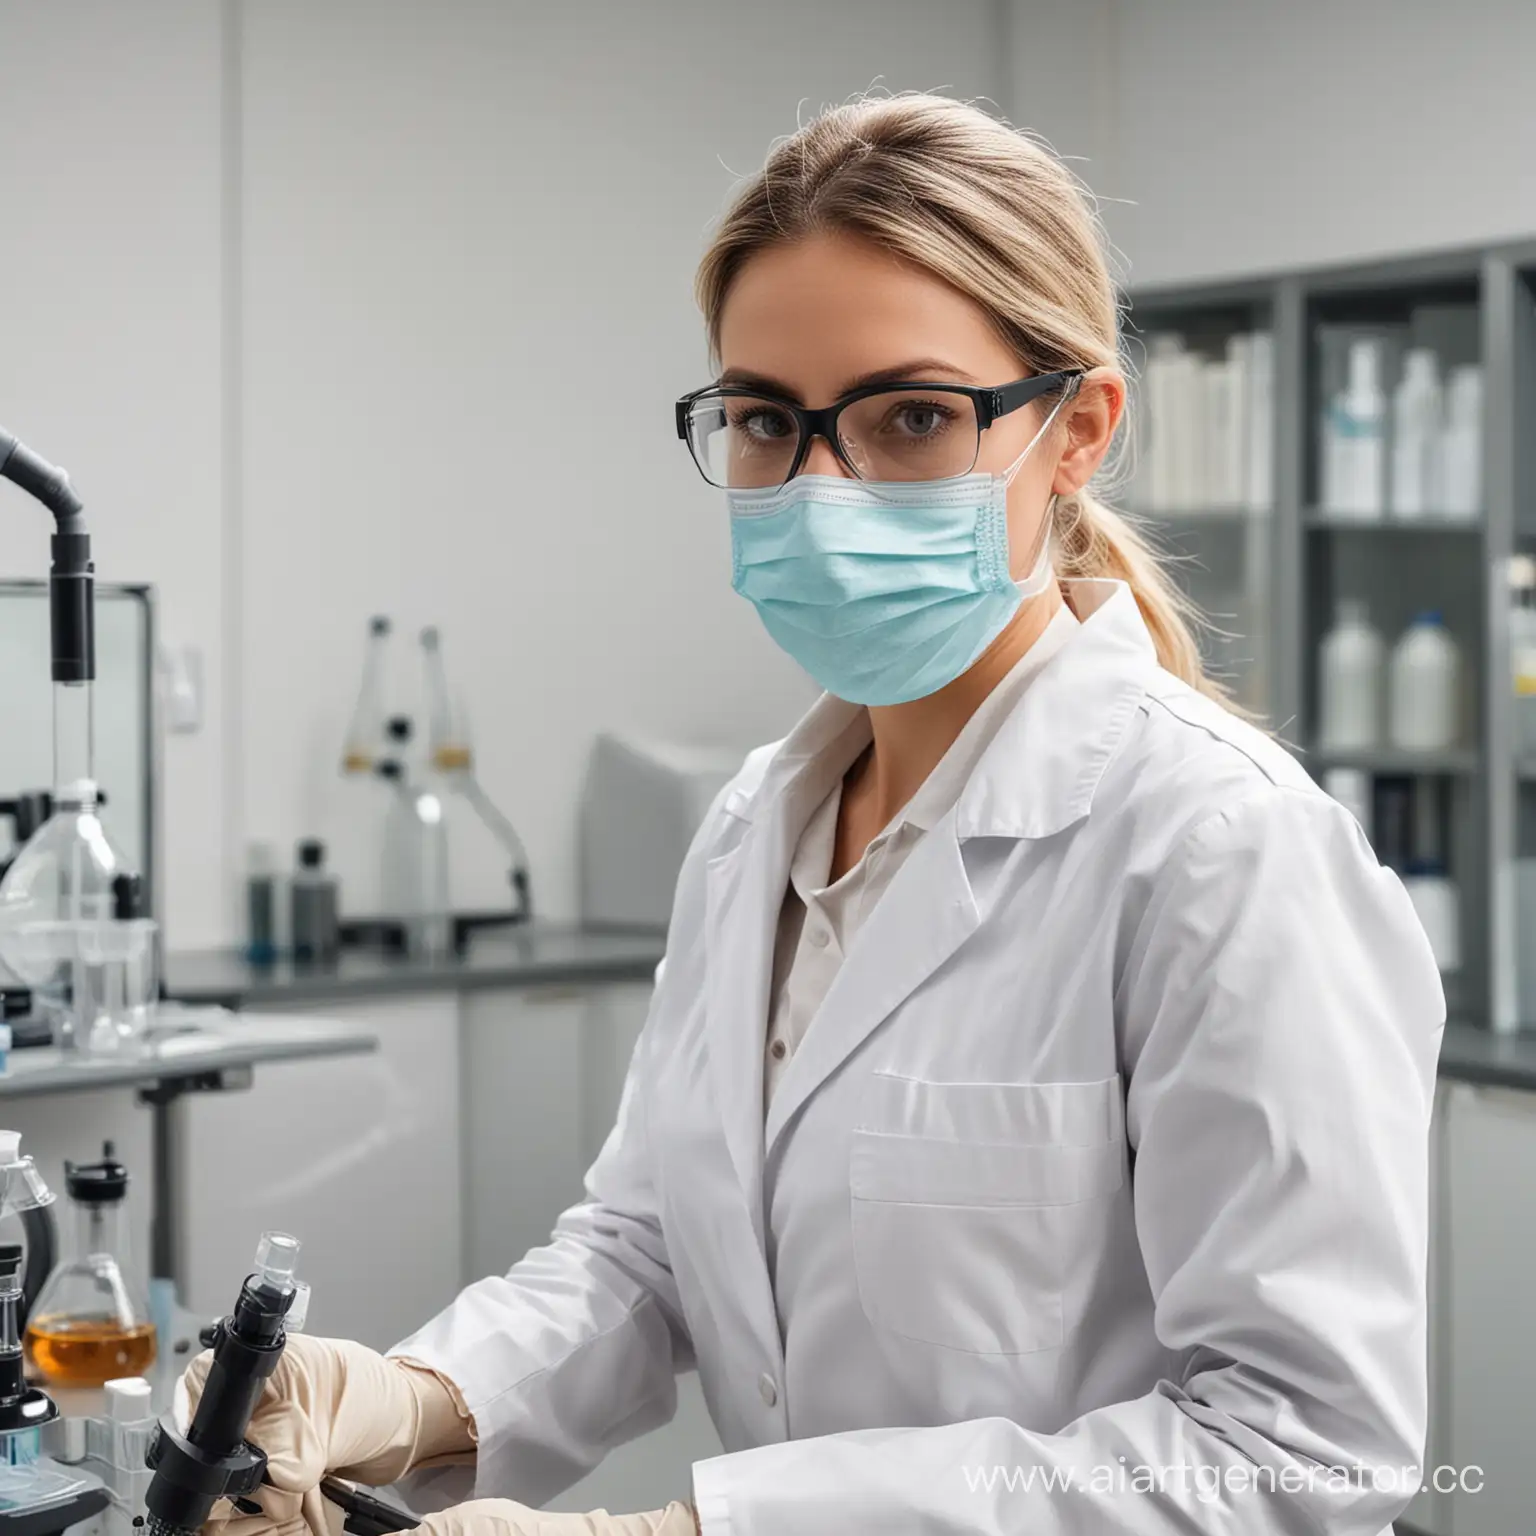 Female scientist working in the laboratory. She is wearing a white lab coat, goggles and a mask.